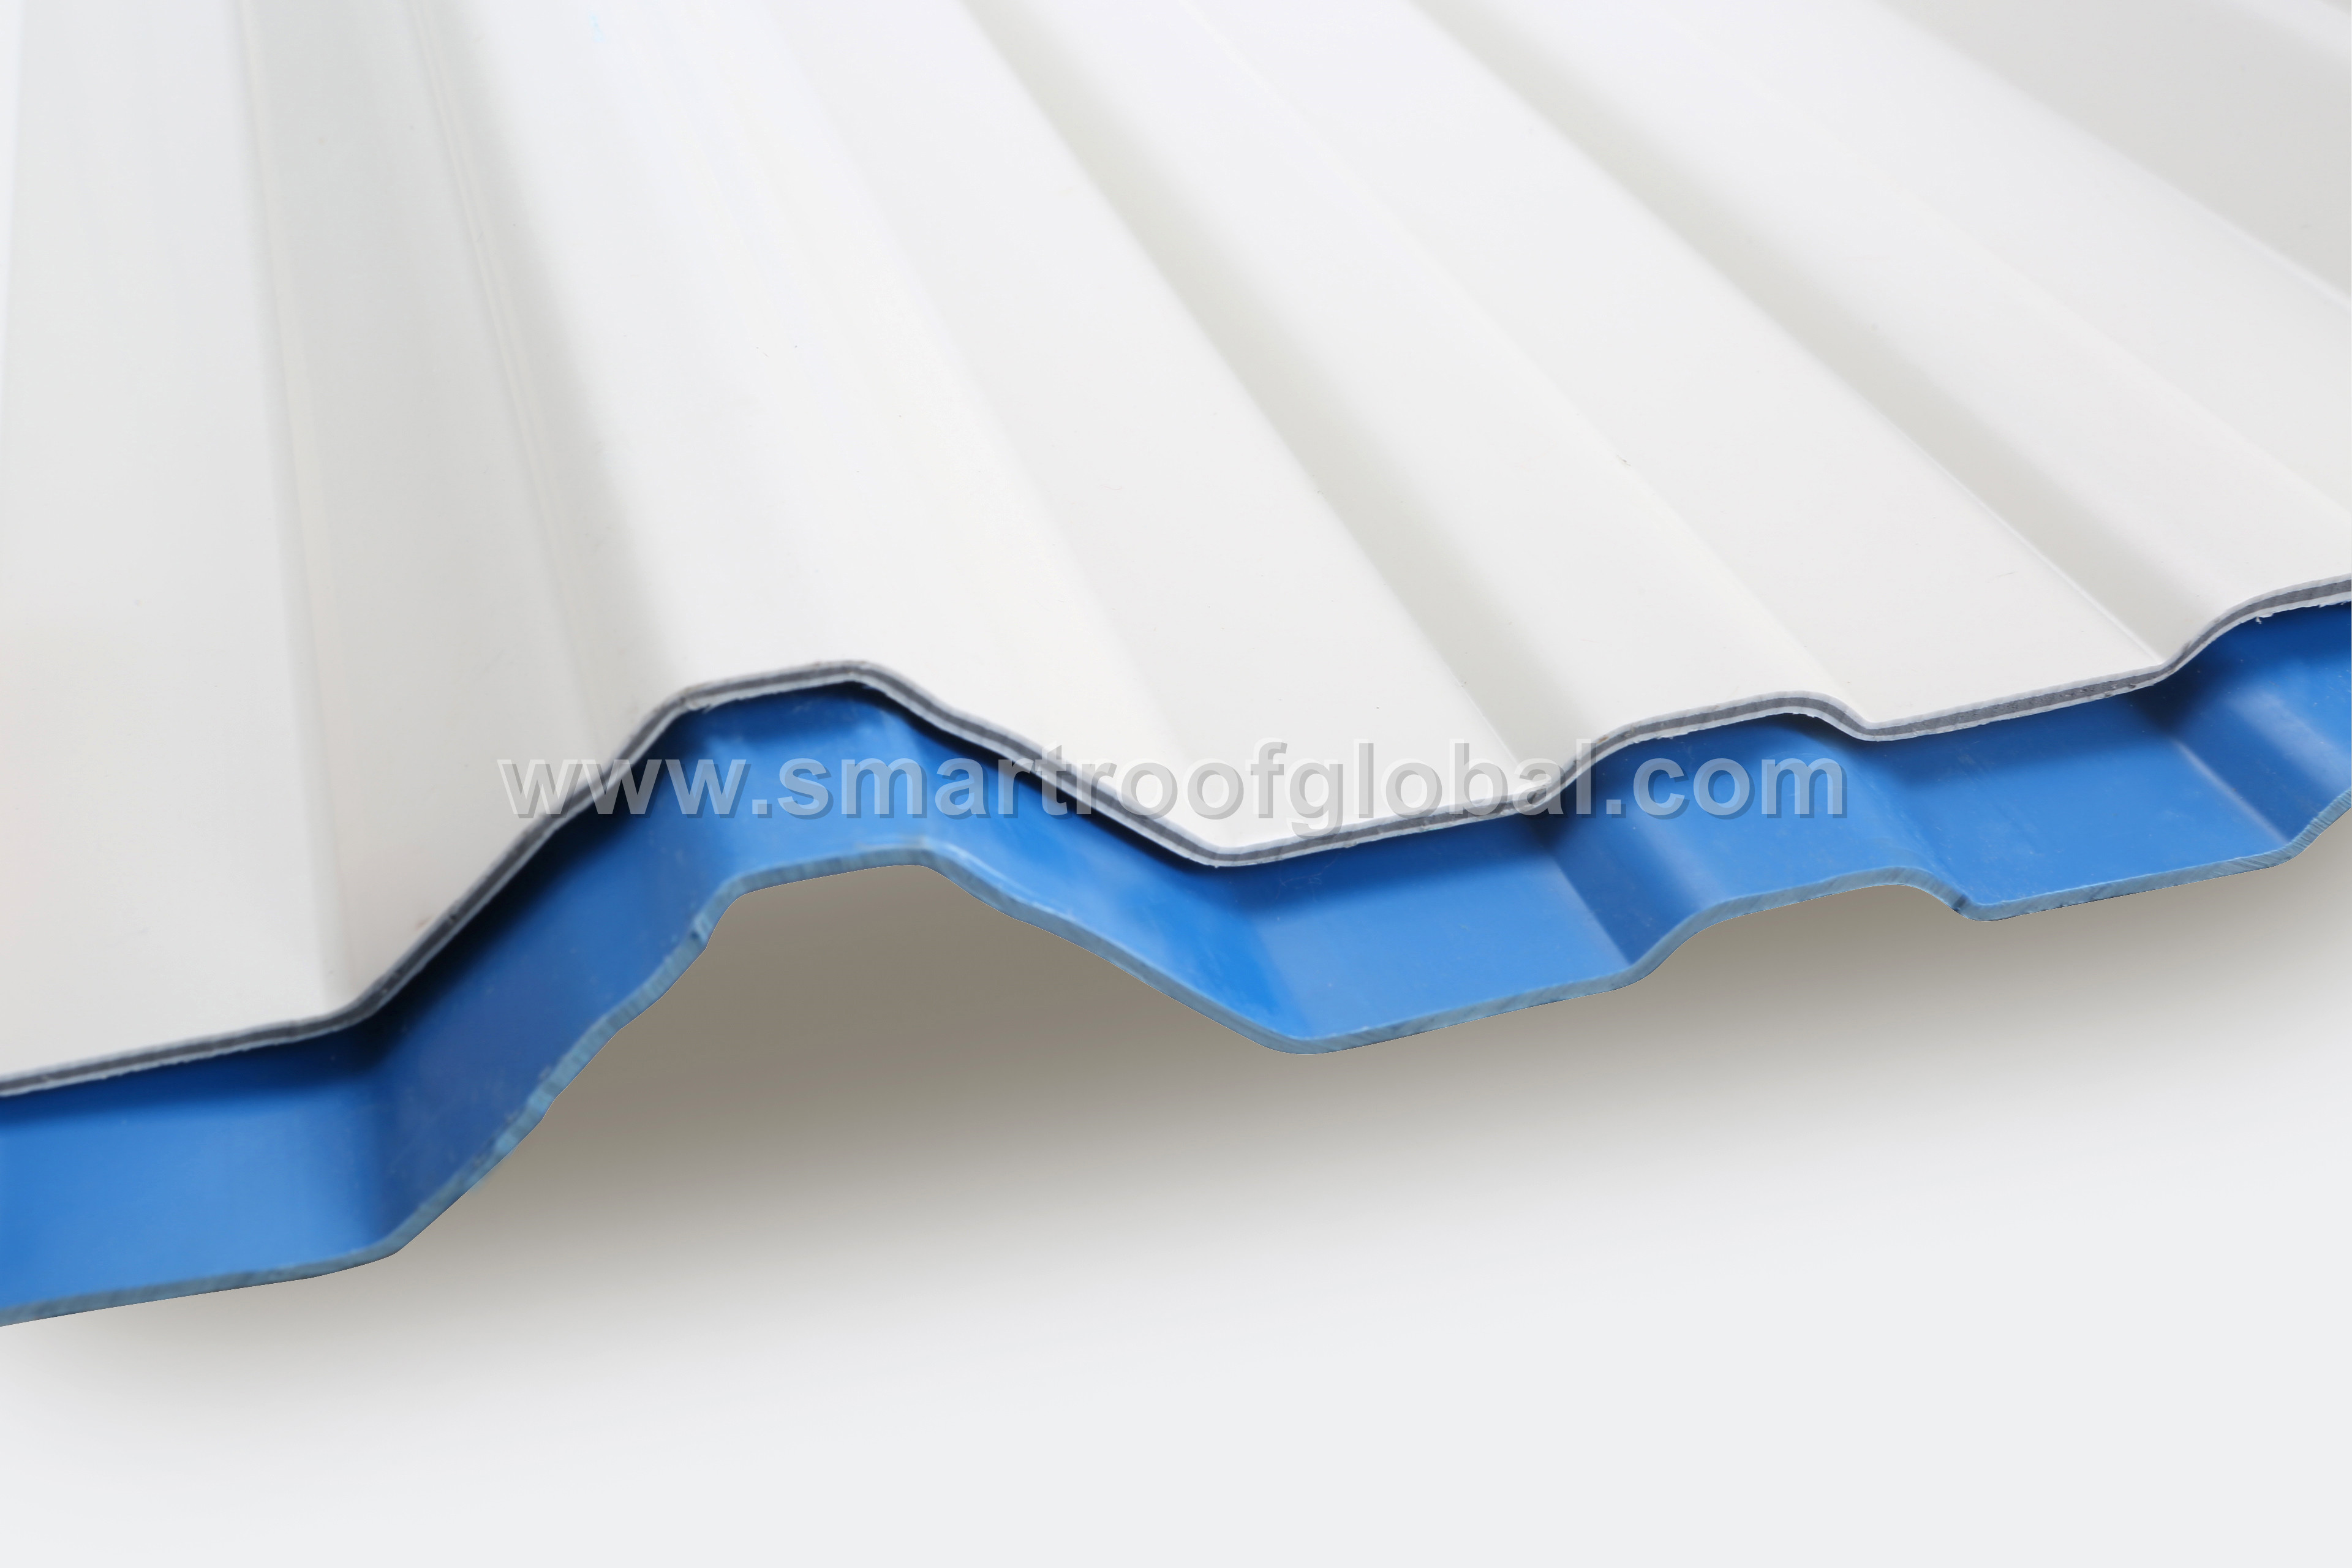 Manufacturer of Corrugated Pvc Roofing - Corrugated Polycarbonate – Smartroof